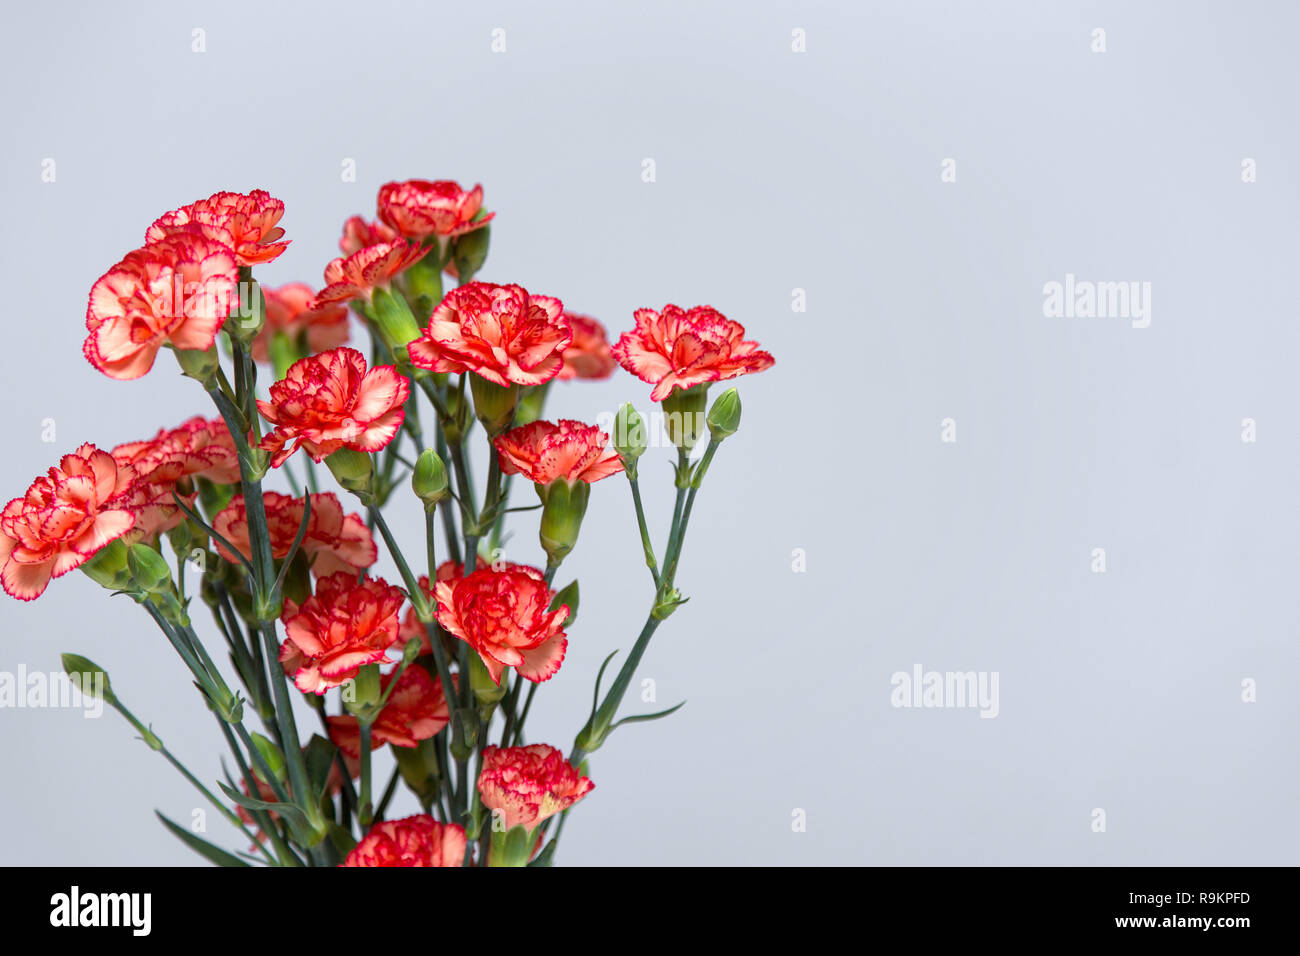 A bunch of red and pink cloves flowers on a grey gradient background copy space. Stock Photo